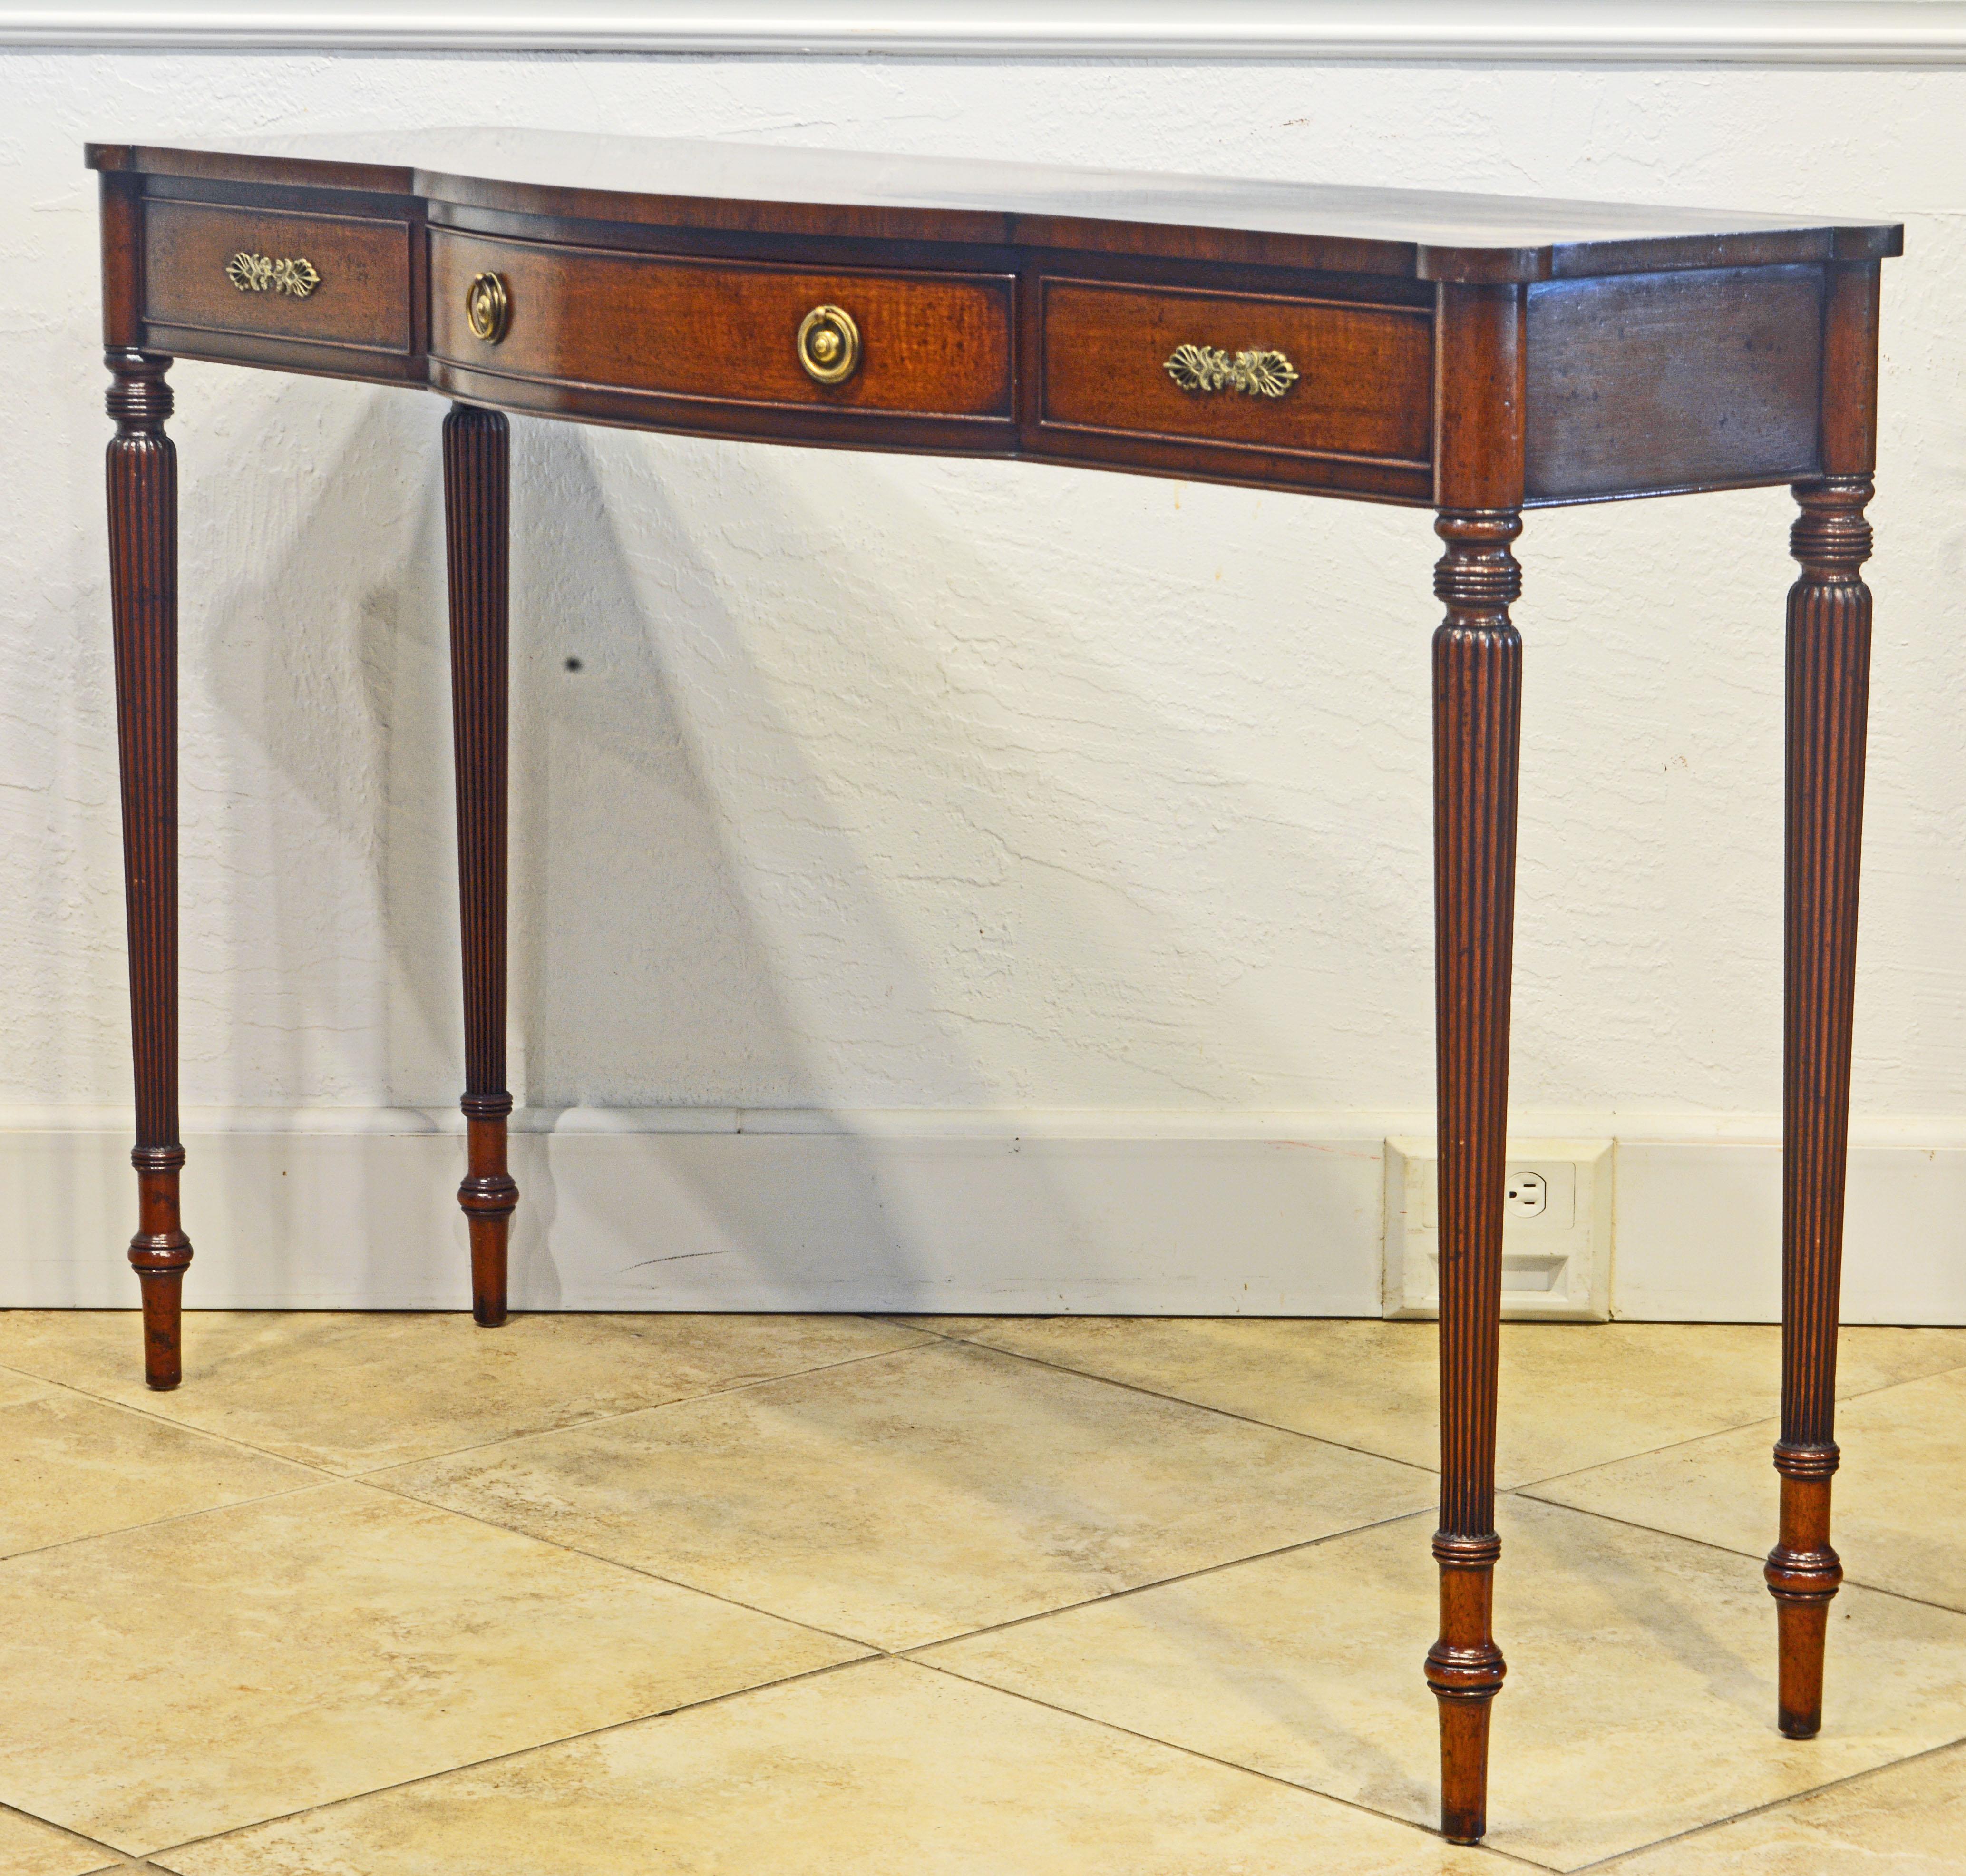 Of slender and elegant proportions this bench made console table features a satinwood inlaid mahogany top with 'ears' in each corner corresponding with four typical turned and fluted baluster shape legs. The frieze holds a central bow front drawer